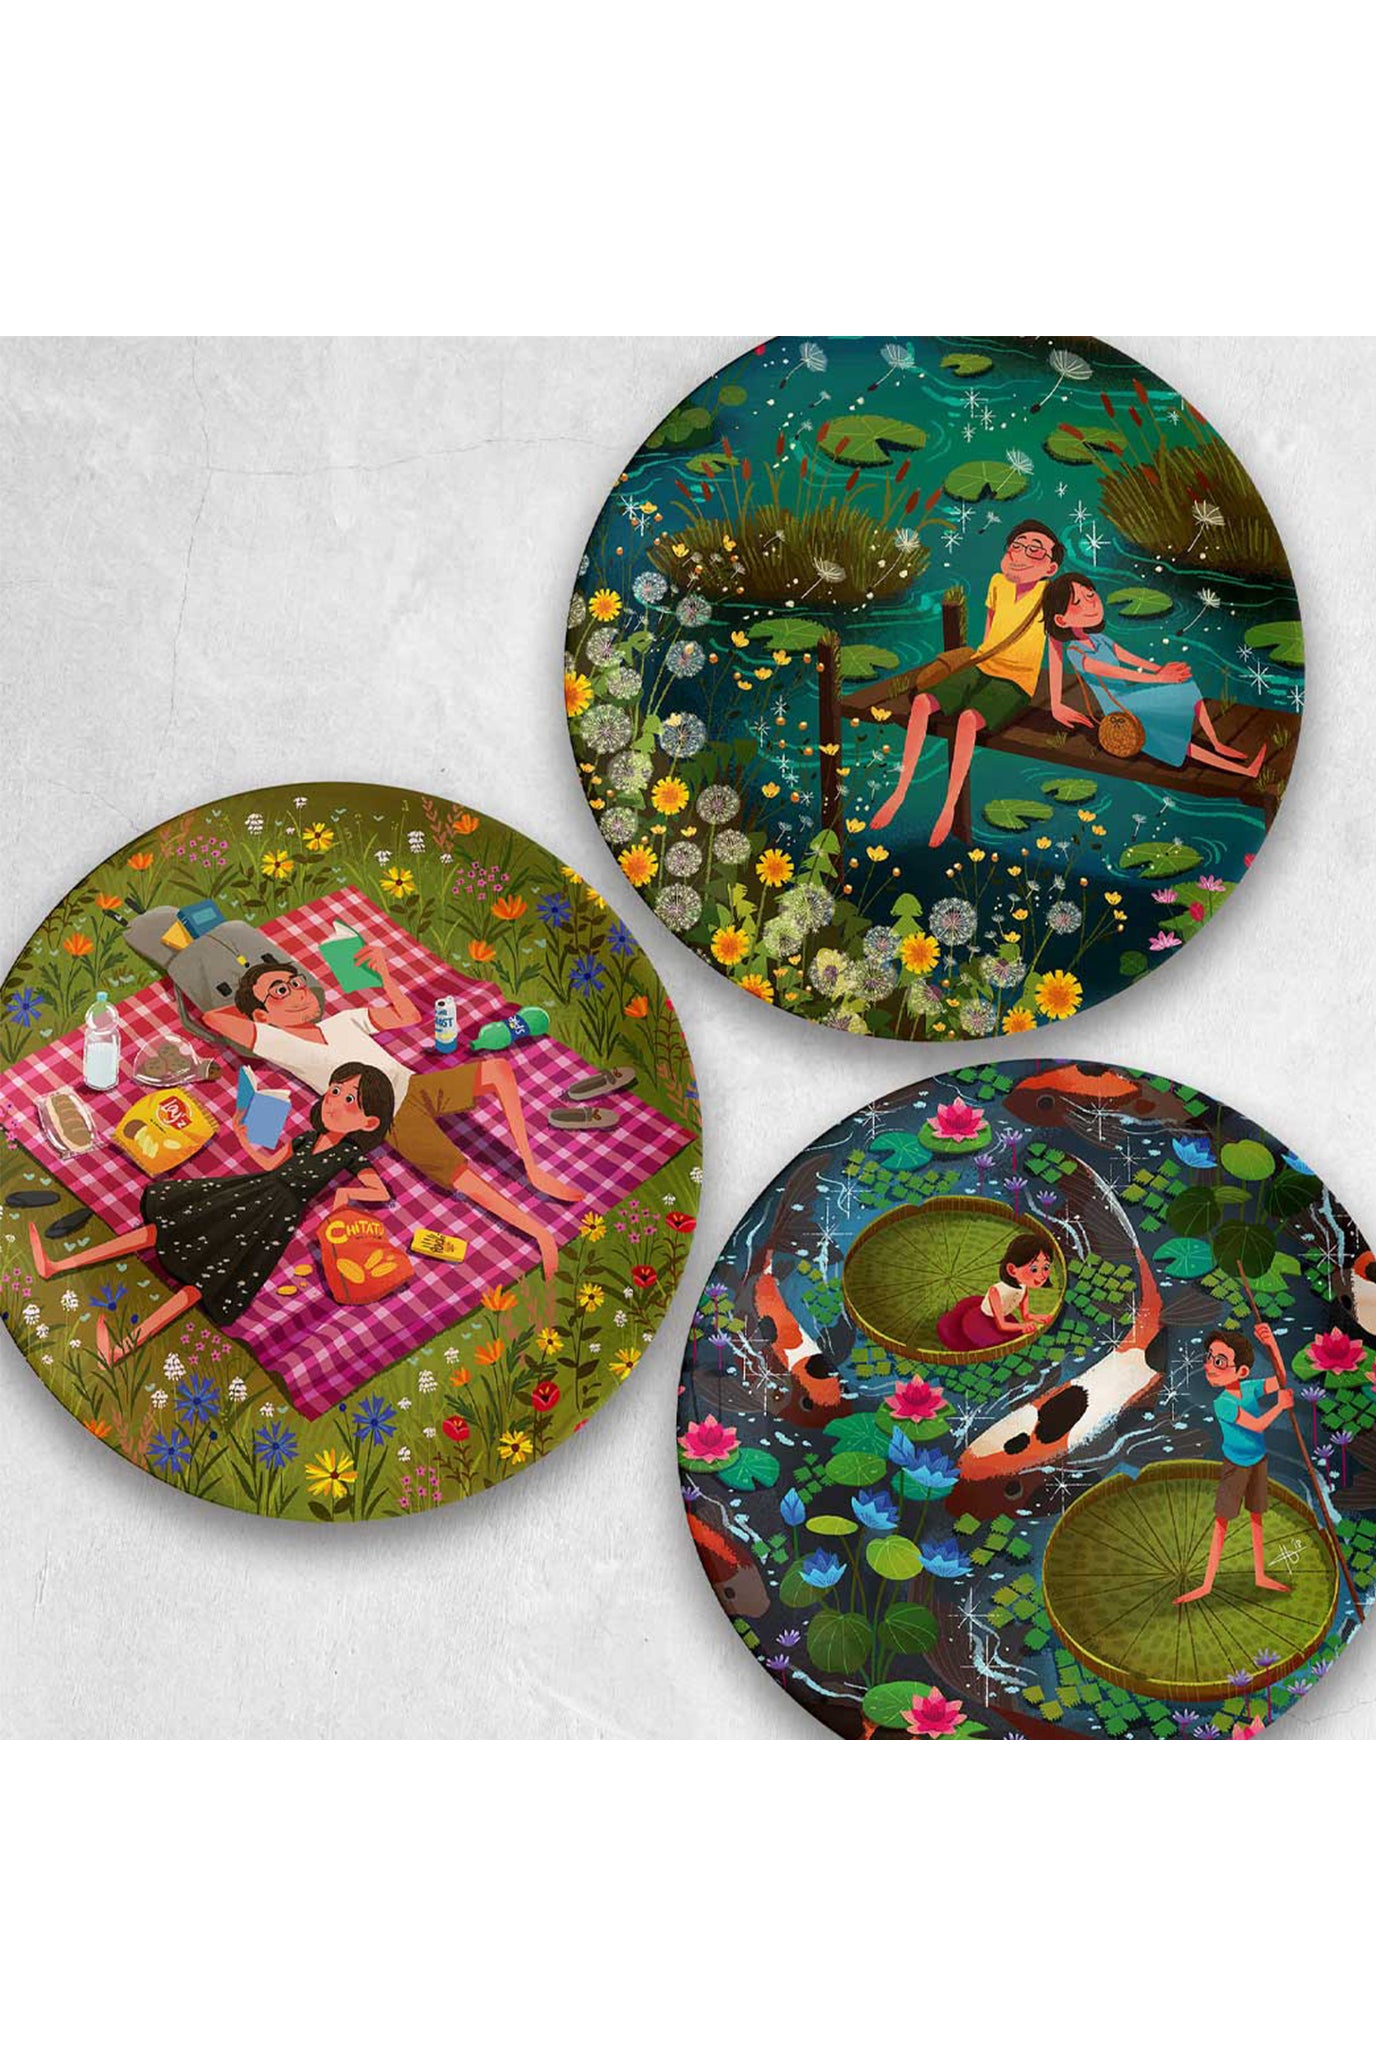 MOMENTS OF LOVE (DECOR PLATE (SET OF 3)